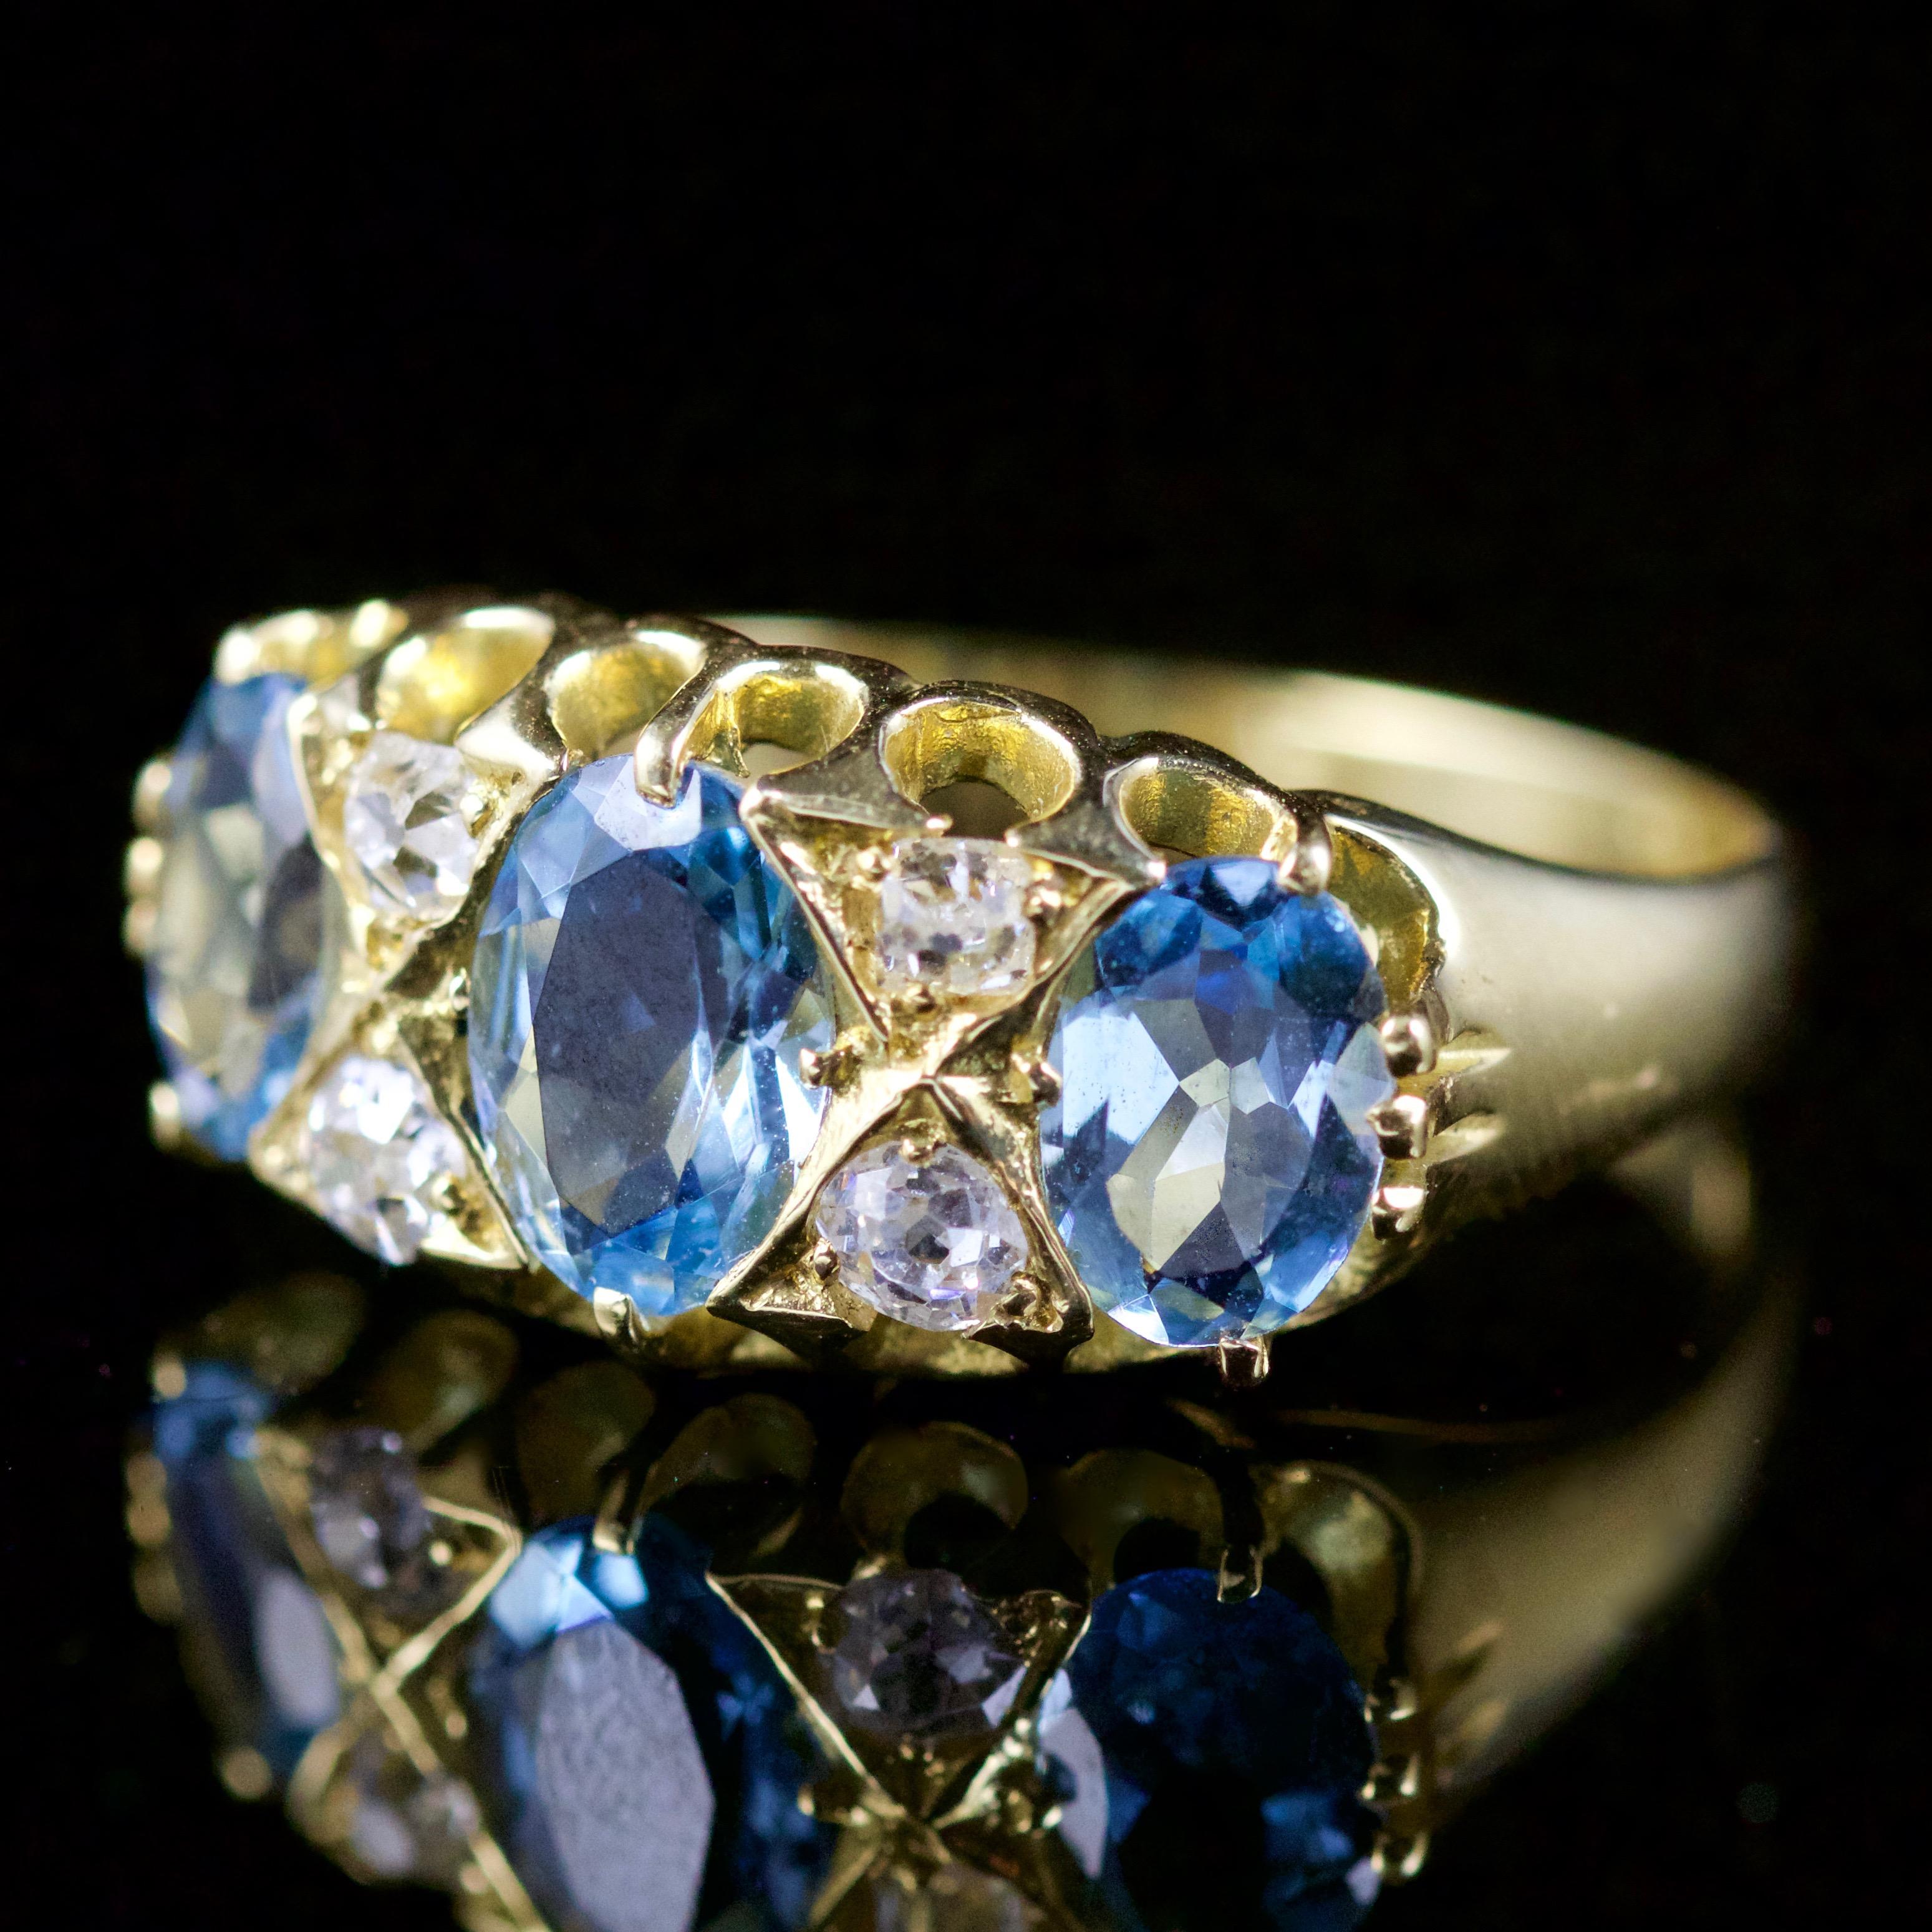 This Victorian Aquamarine and Diamond ring is set in 18ct Gold, Circa 1880.

Set with a trilogy of Aquamarines and smaller Diamonds nestled in-between.

The Diamonds are SI 1 H colour, and are truly beautiful.

Trilogy means past, present and future